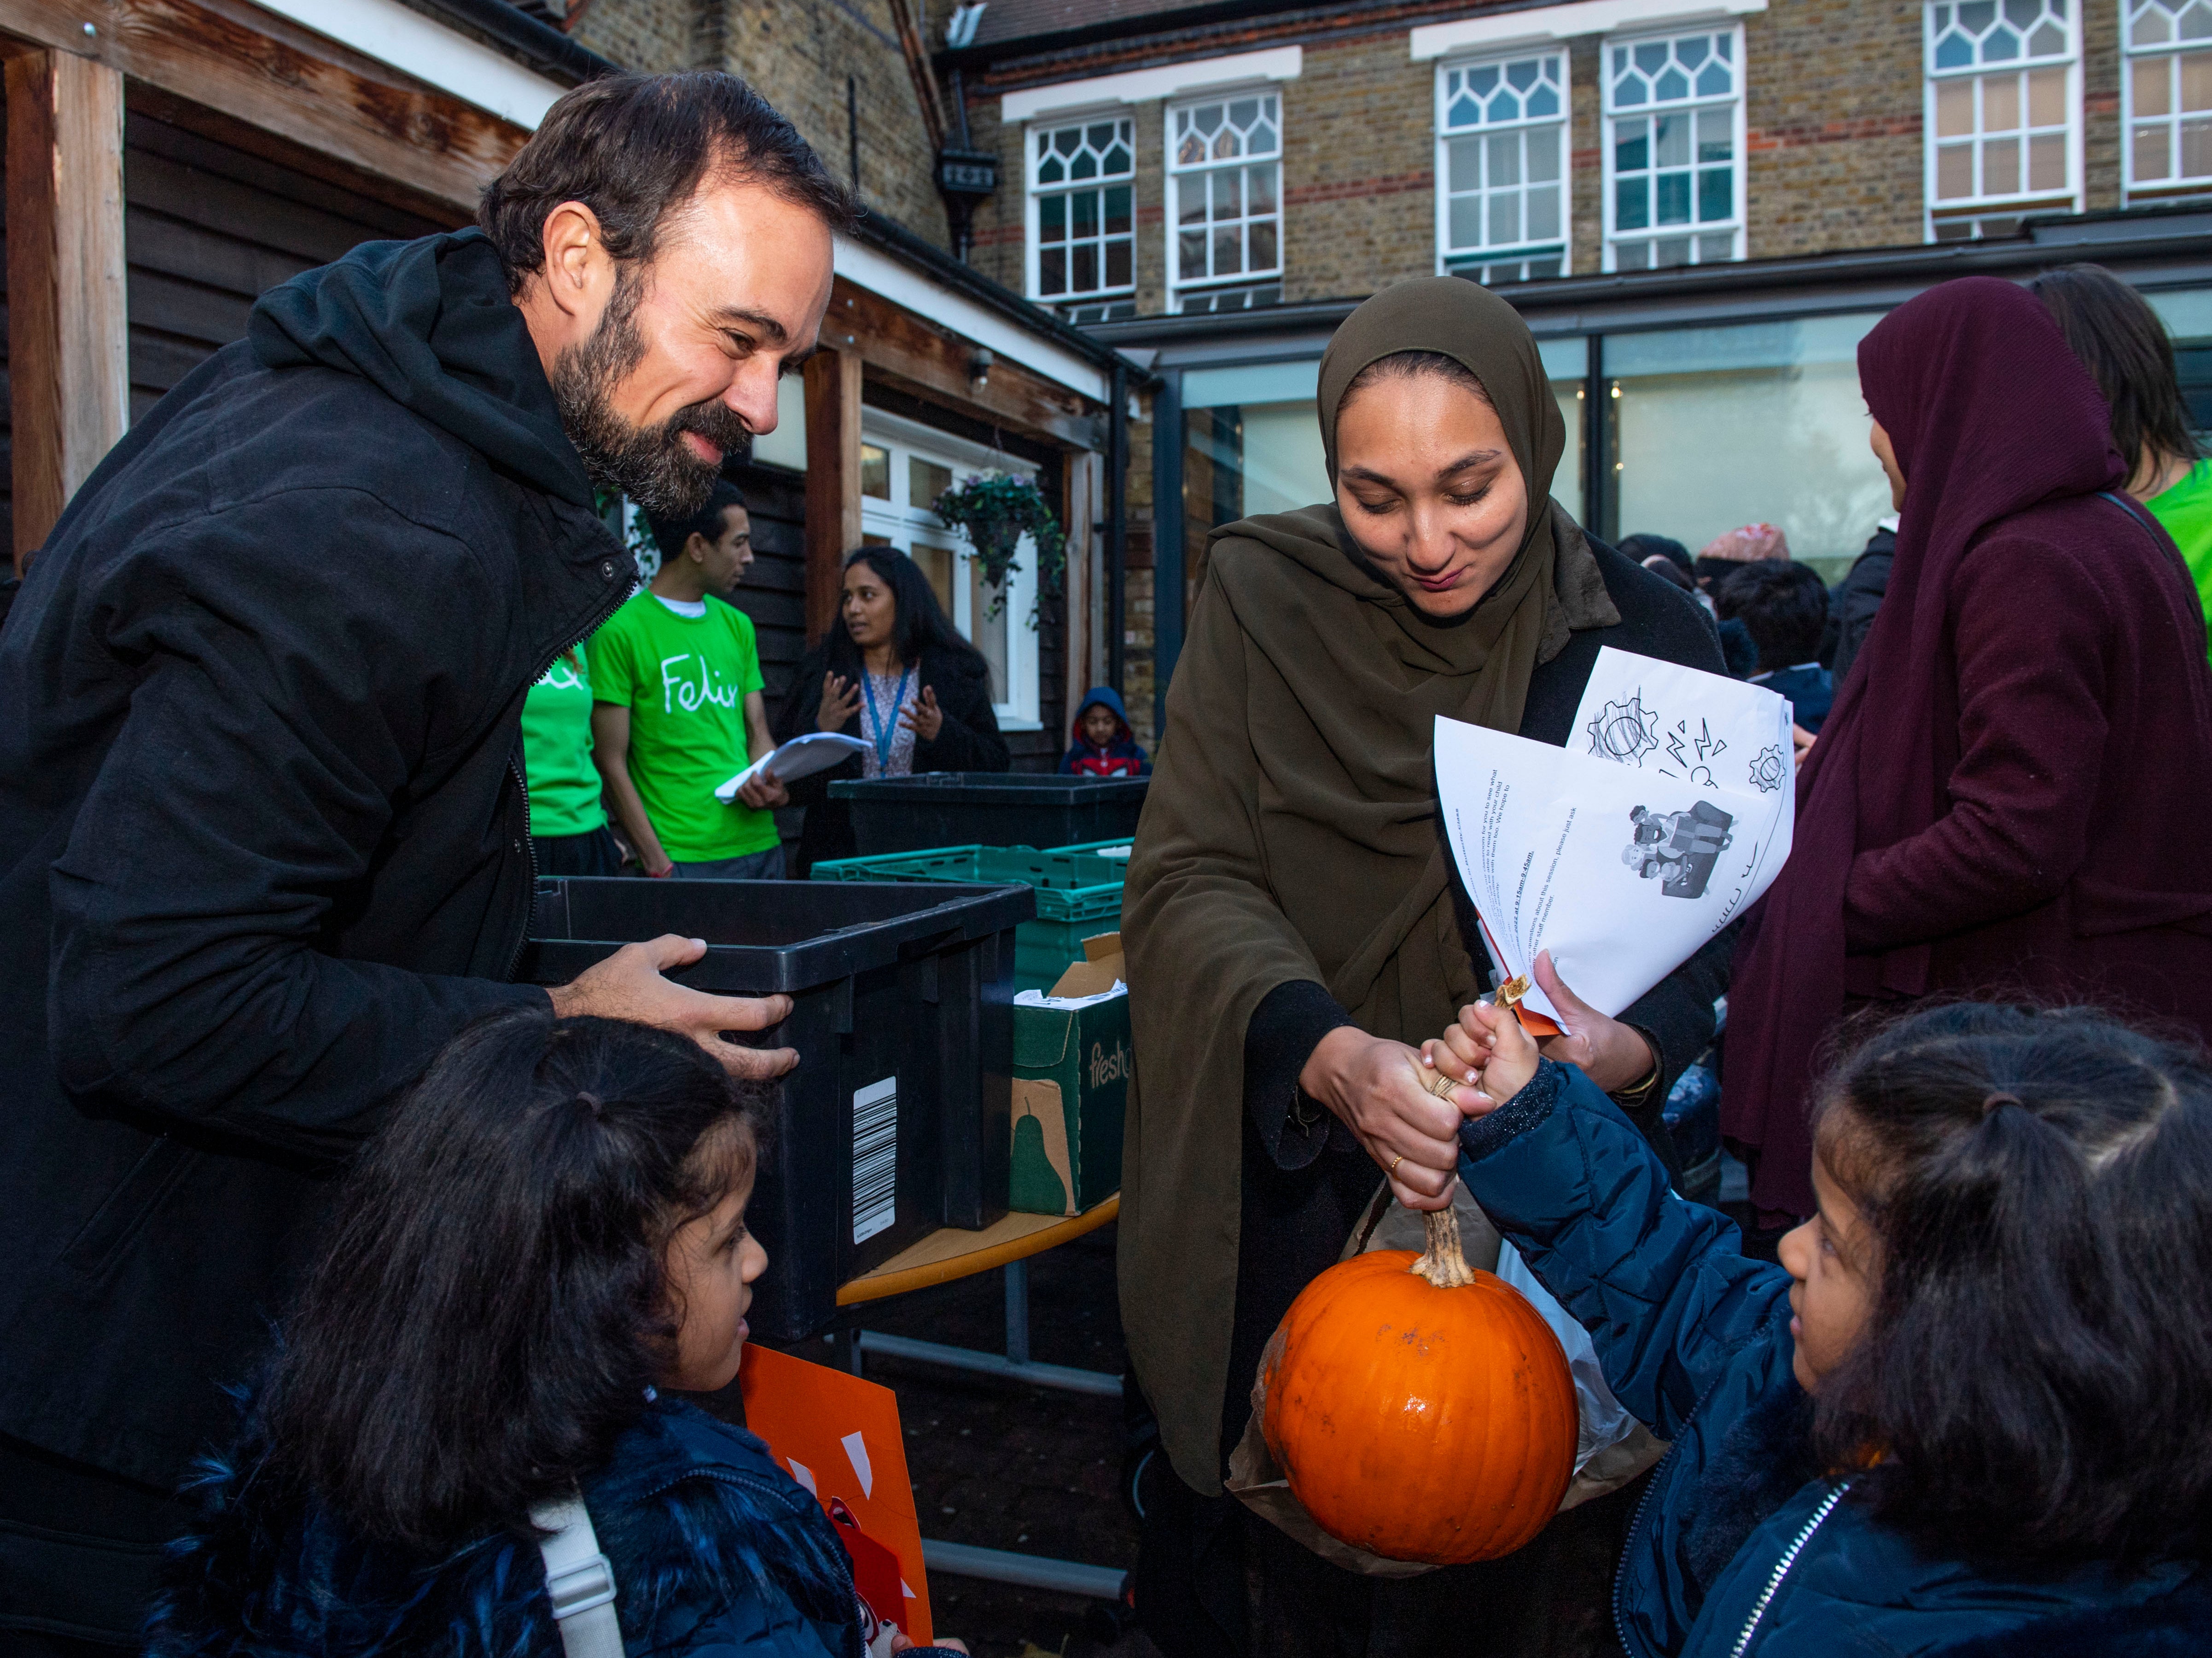 Lord Lebedev distributes food to families at St Paul’s Primary School in Whitechapel, east London